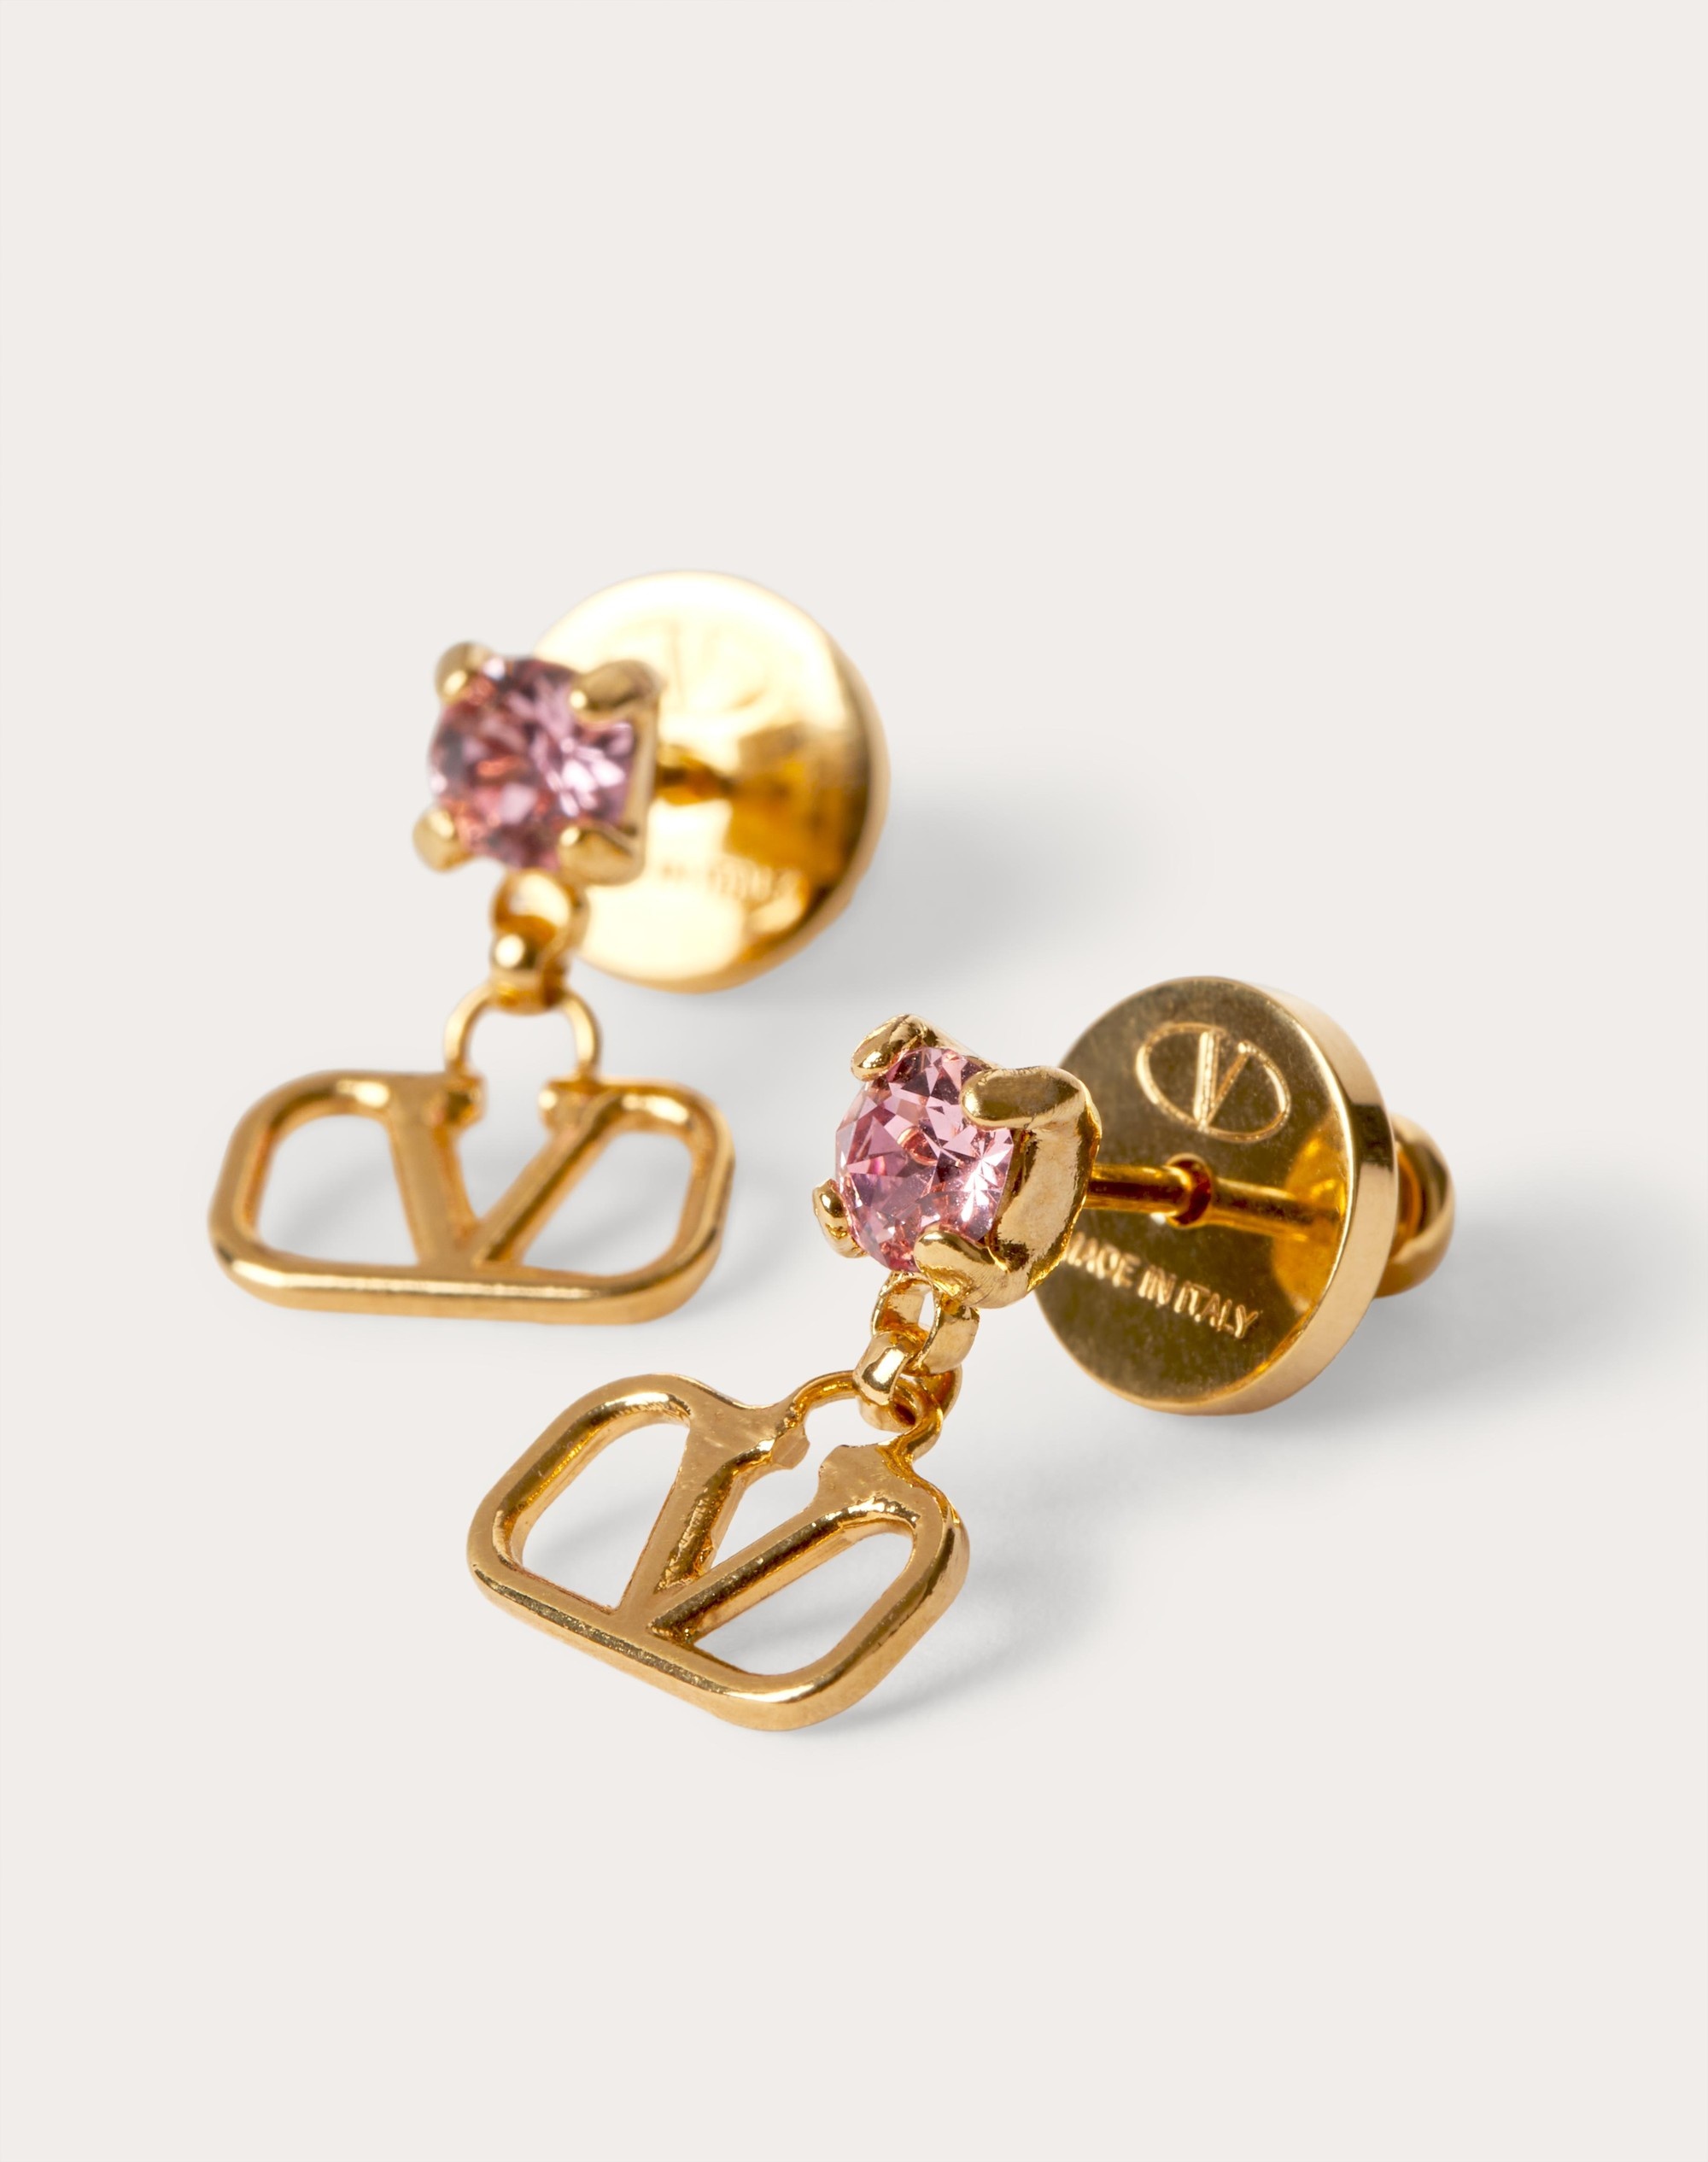 VLOGO SIGNATURE EARRINGS IN METAL AND SWAROVSKI® CRYSTALS - 2